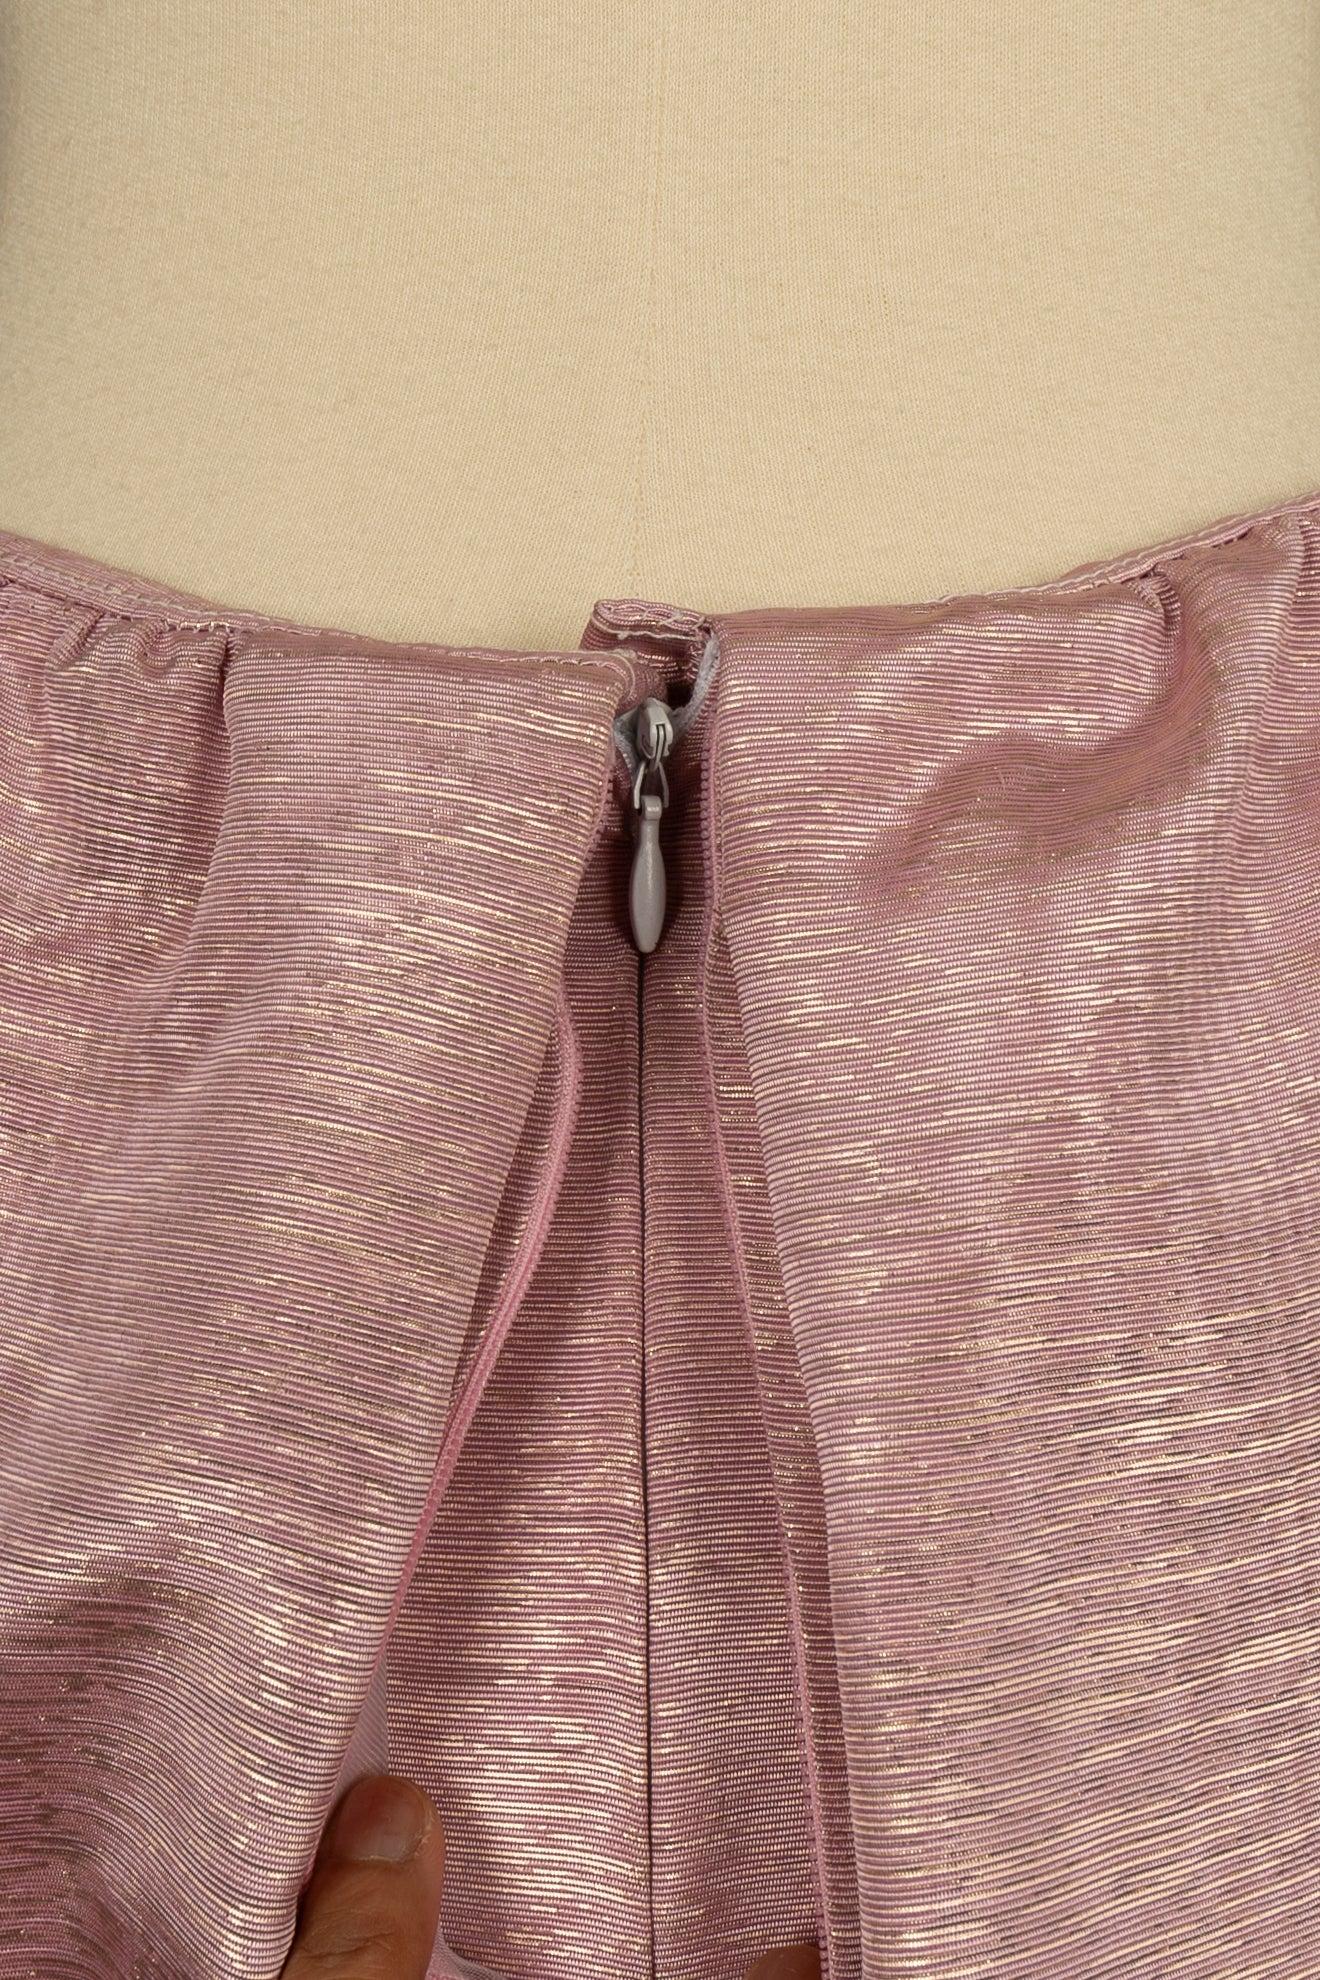 Nina Ricci Skirt in Pink Cotton Enhanced with Gold For Sale 2